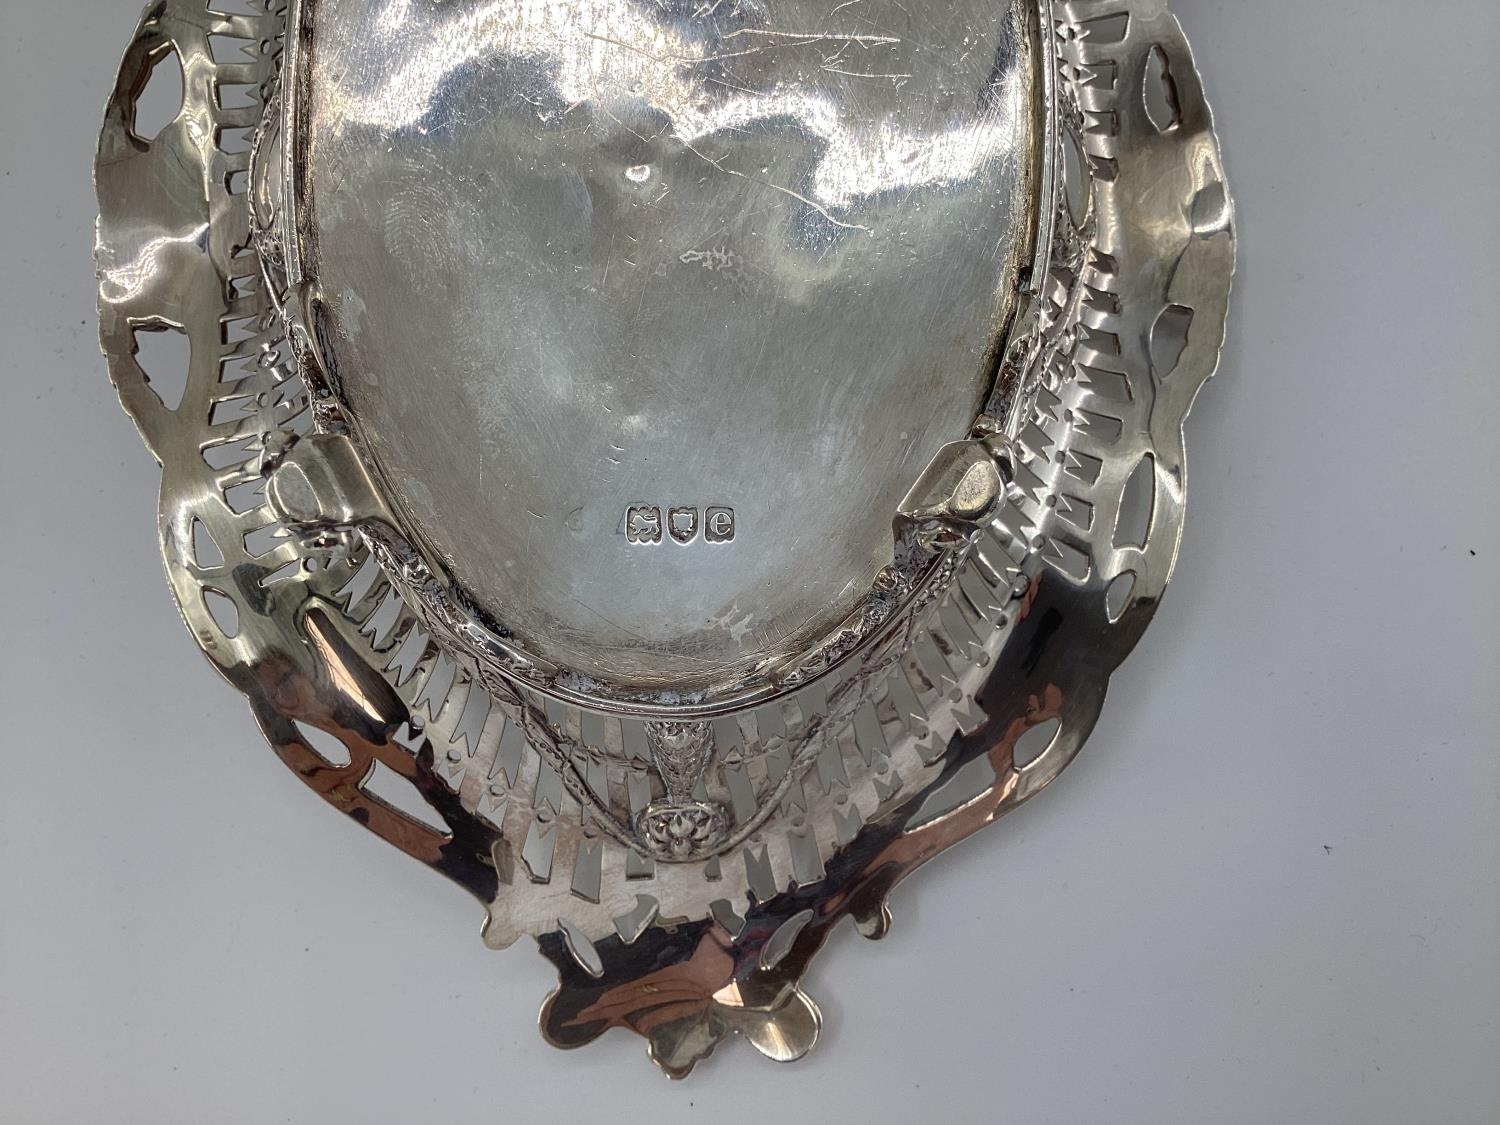 Stirling silver pierced bowl of boat shape design, London, 1900, approx 360grams - Image 4 of 5